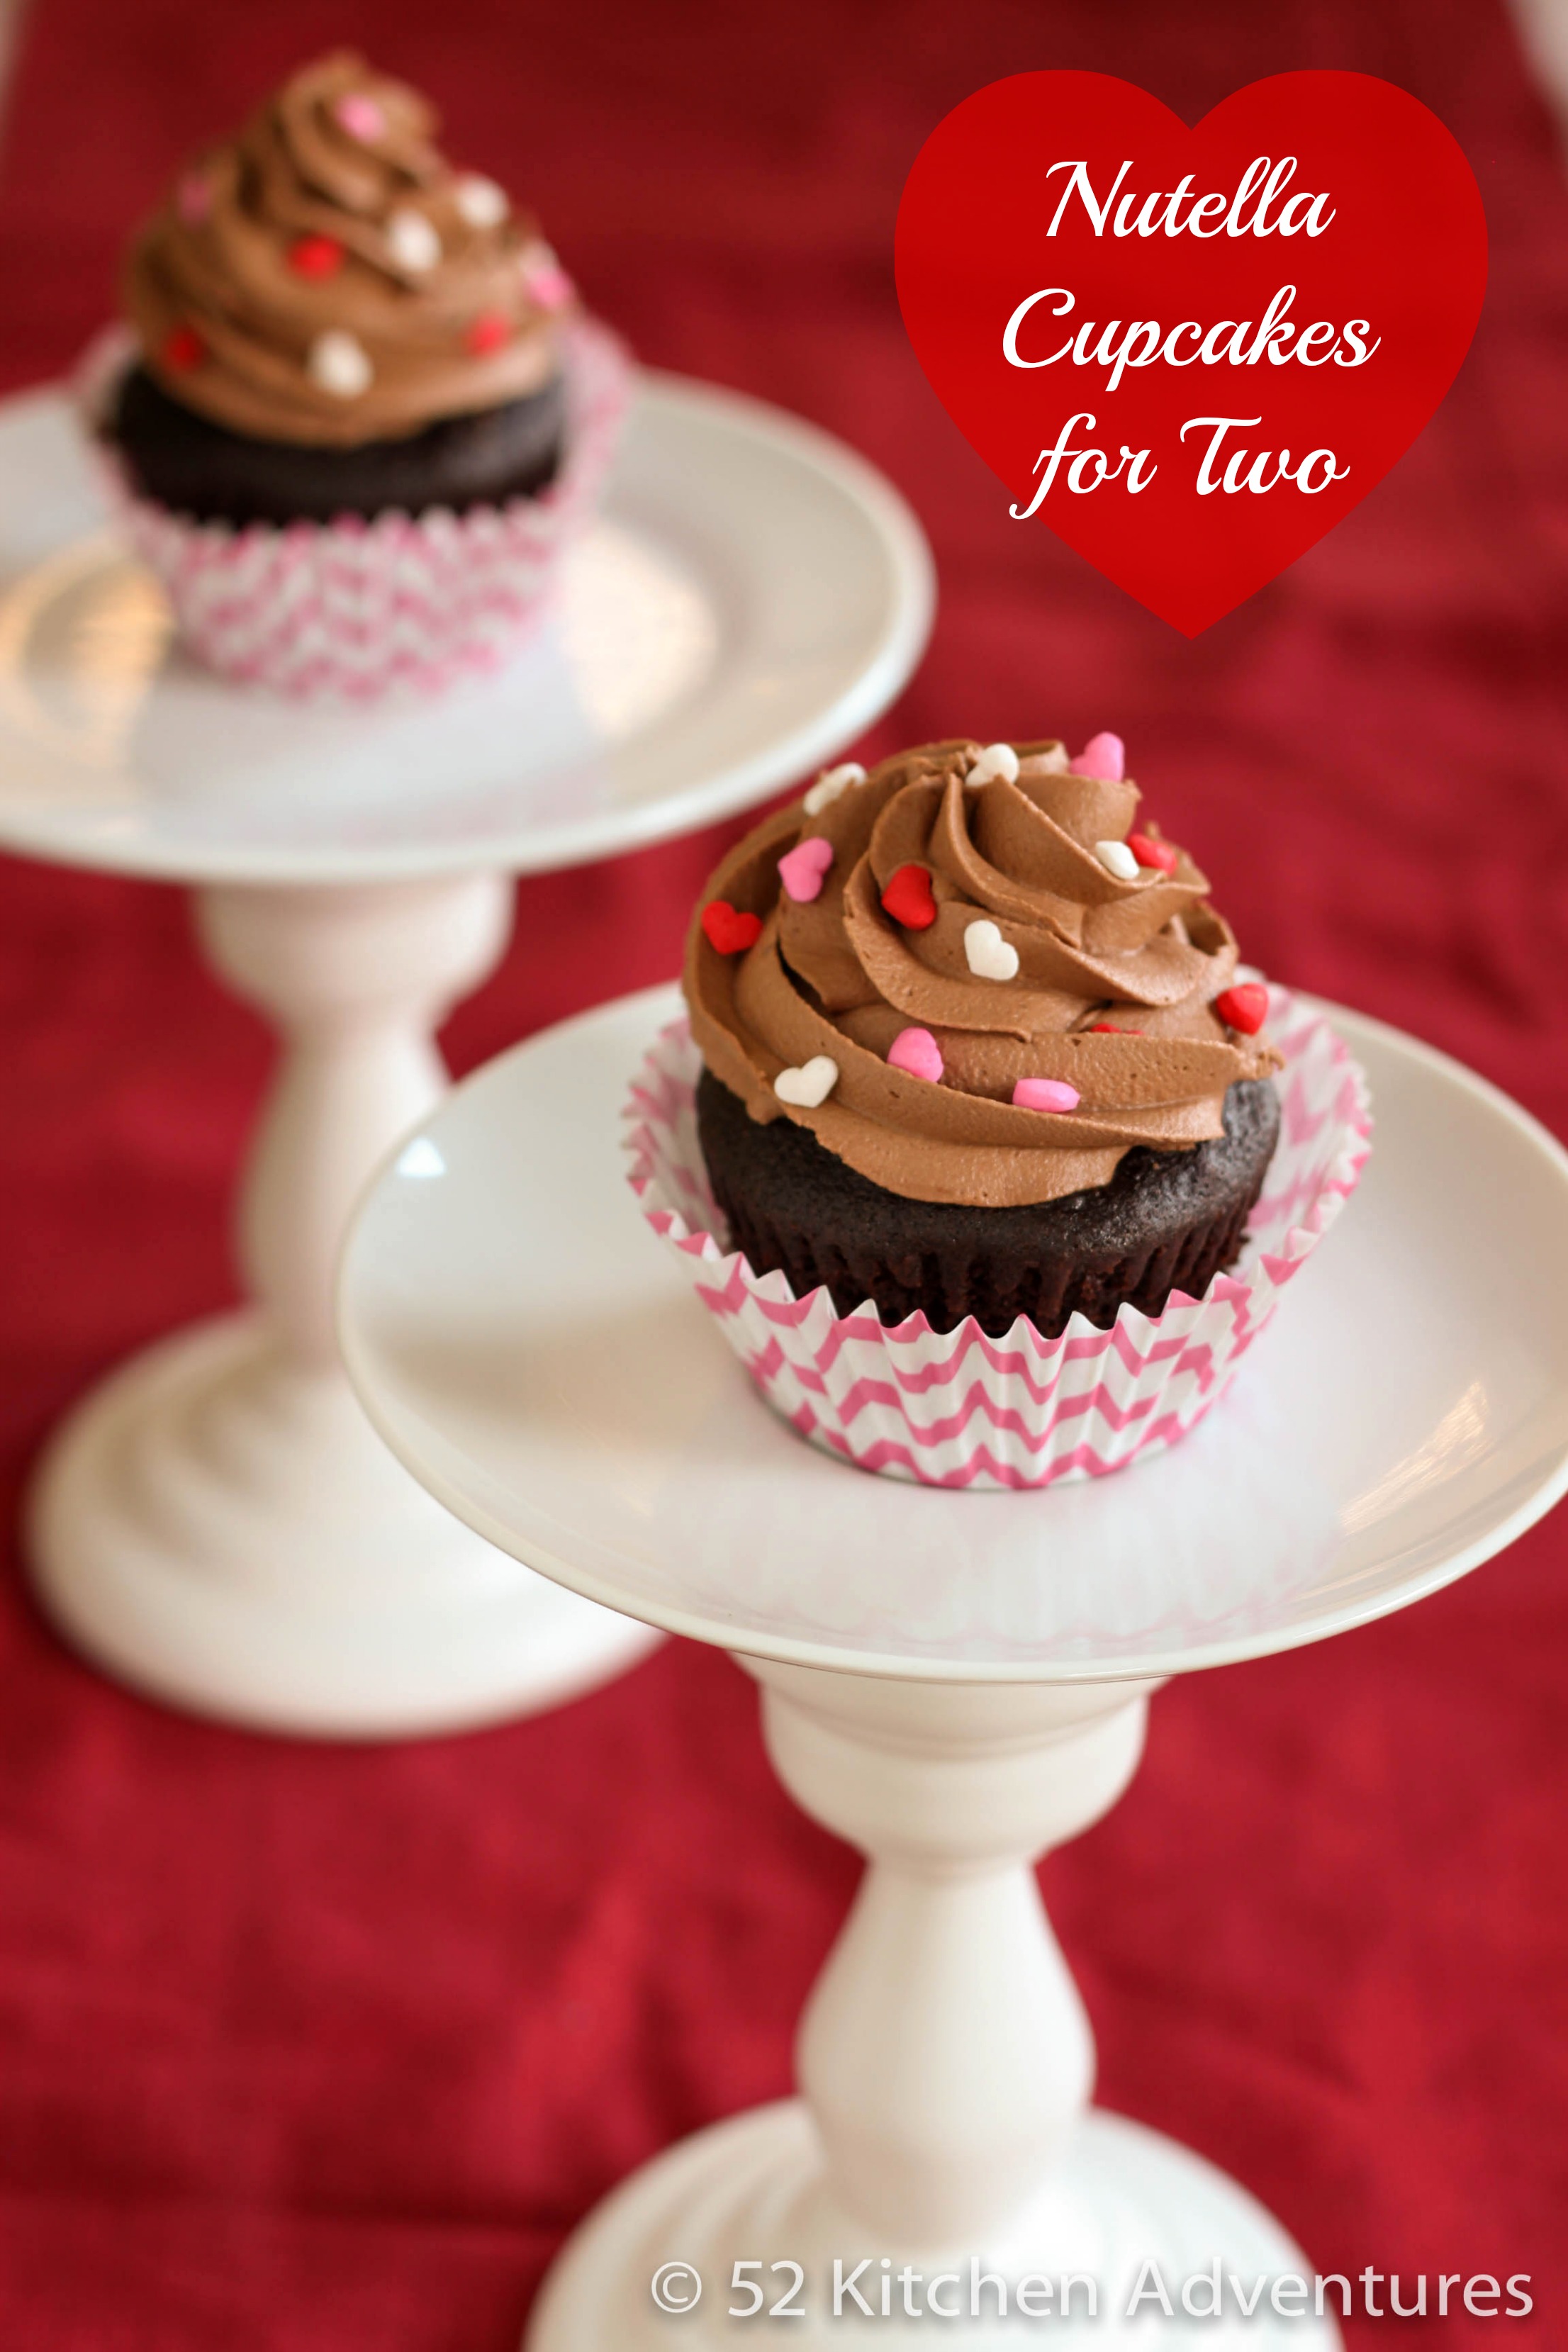 Nutella Cupcakes for 2